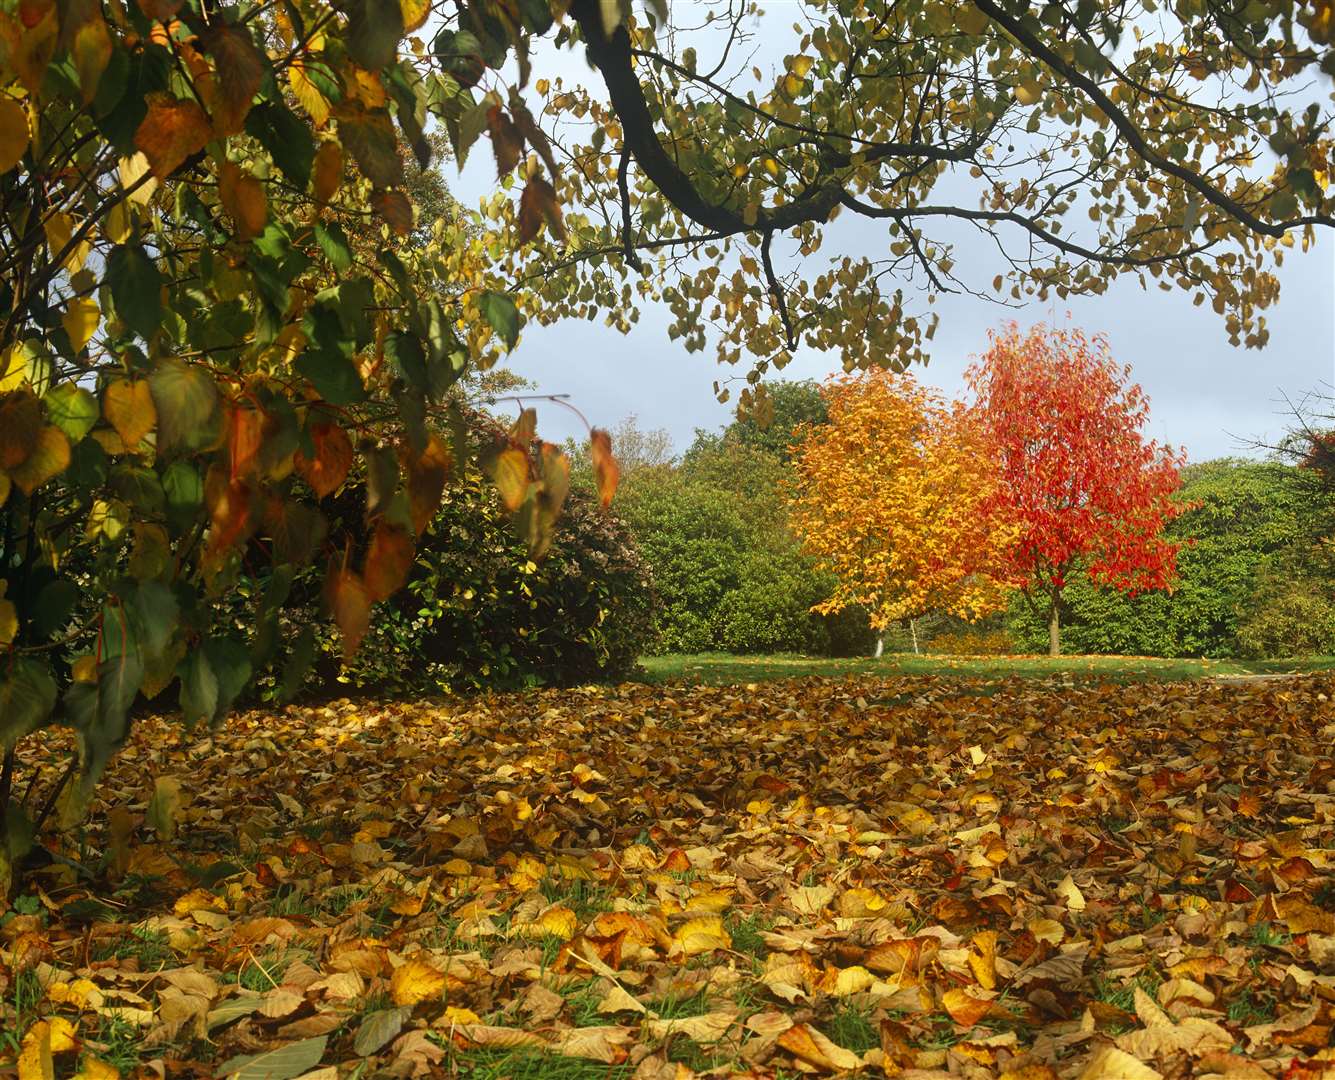 Don't miss the vibrant autumn colours at Emmetts Garden this autumn. Picture: ©National Trust Images / David Sellman